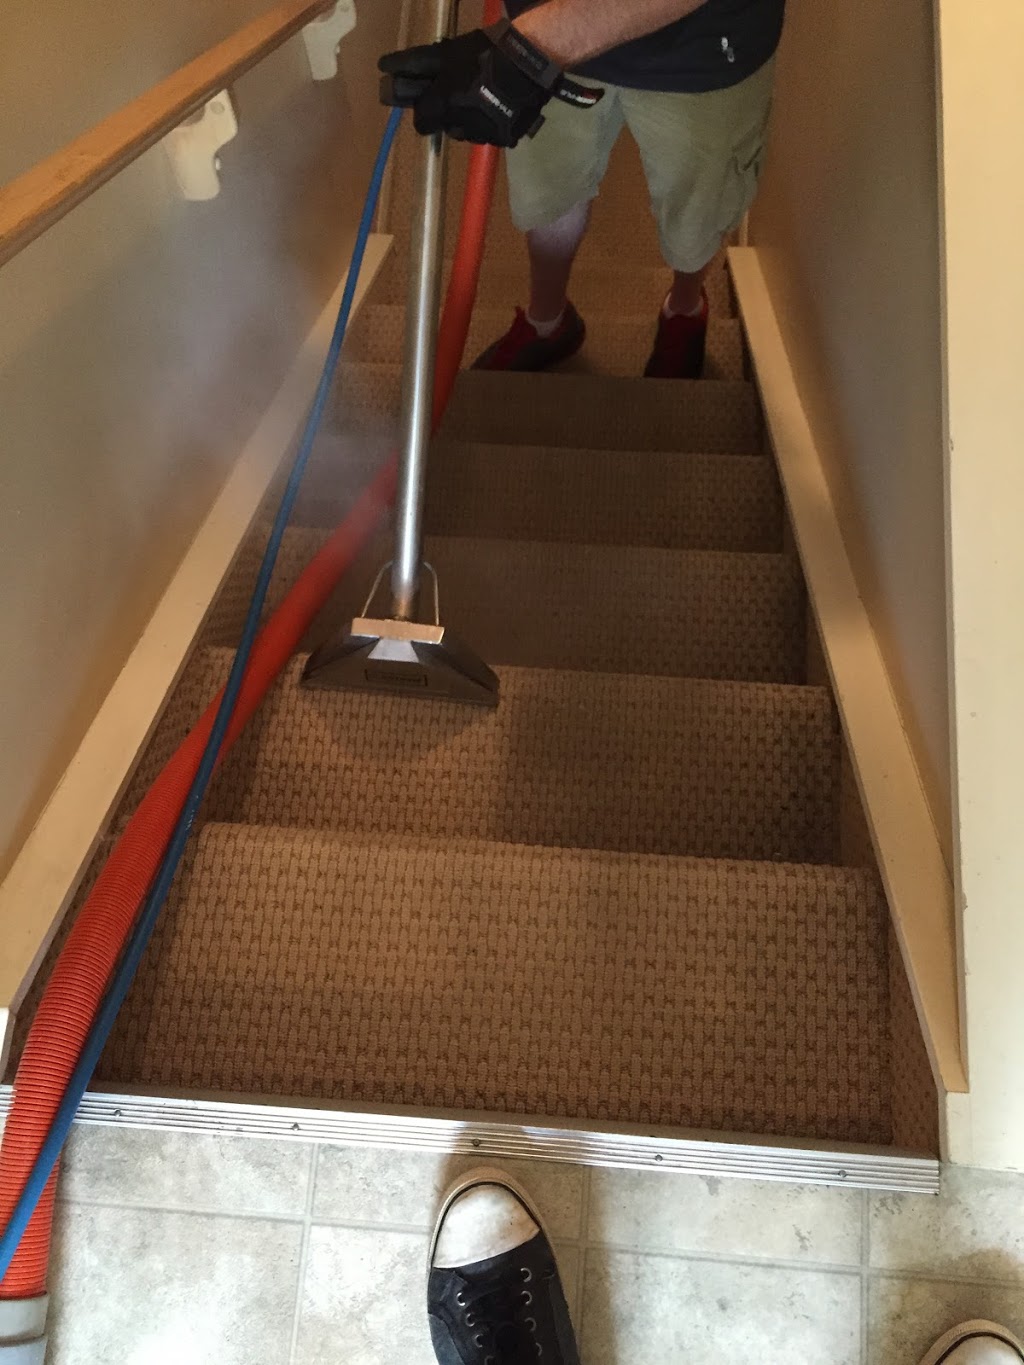 Big Ben Cleaning - Chestermere | 305 E Chestermere Dr, Chestermere, AB T1X 1A1, Canada | Phone: (403) 460-8989